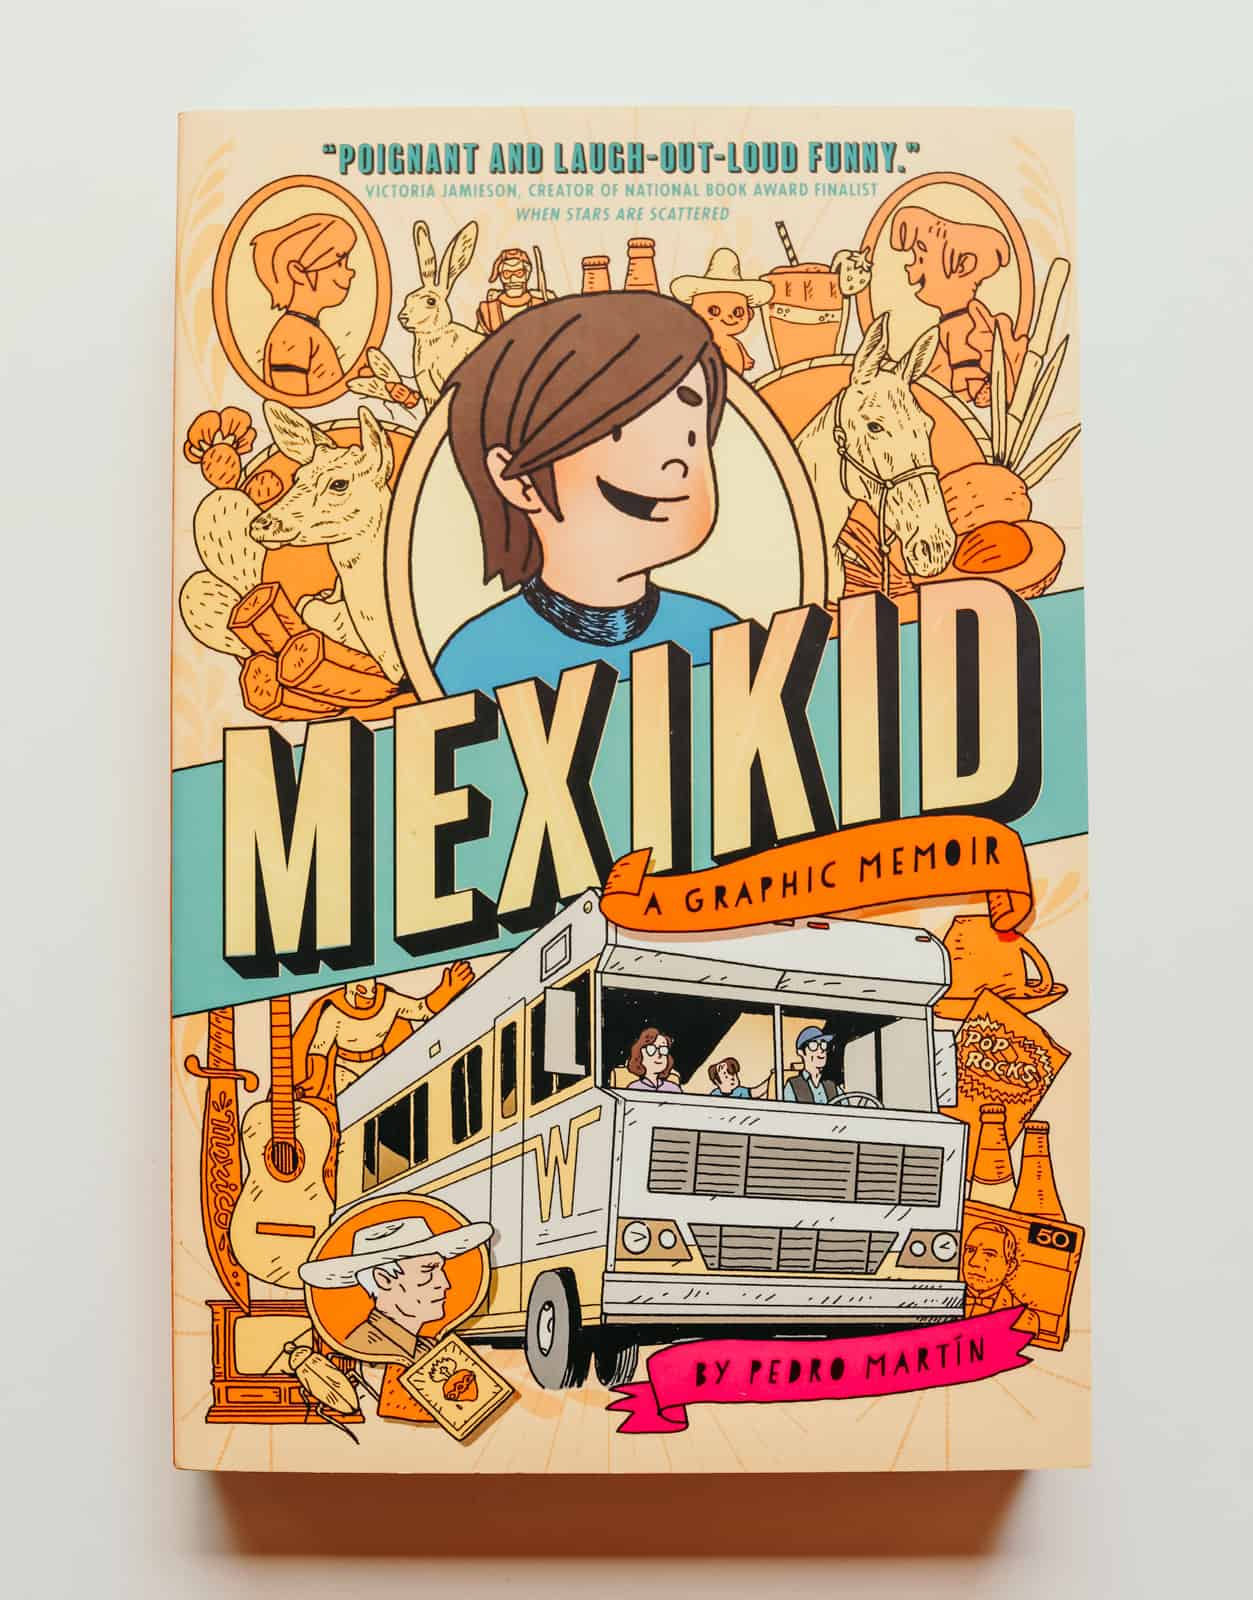 Cover of Mexikid: A Graphic Memoir by Pedro Martin